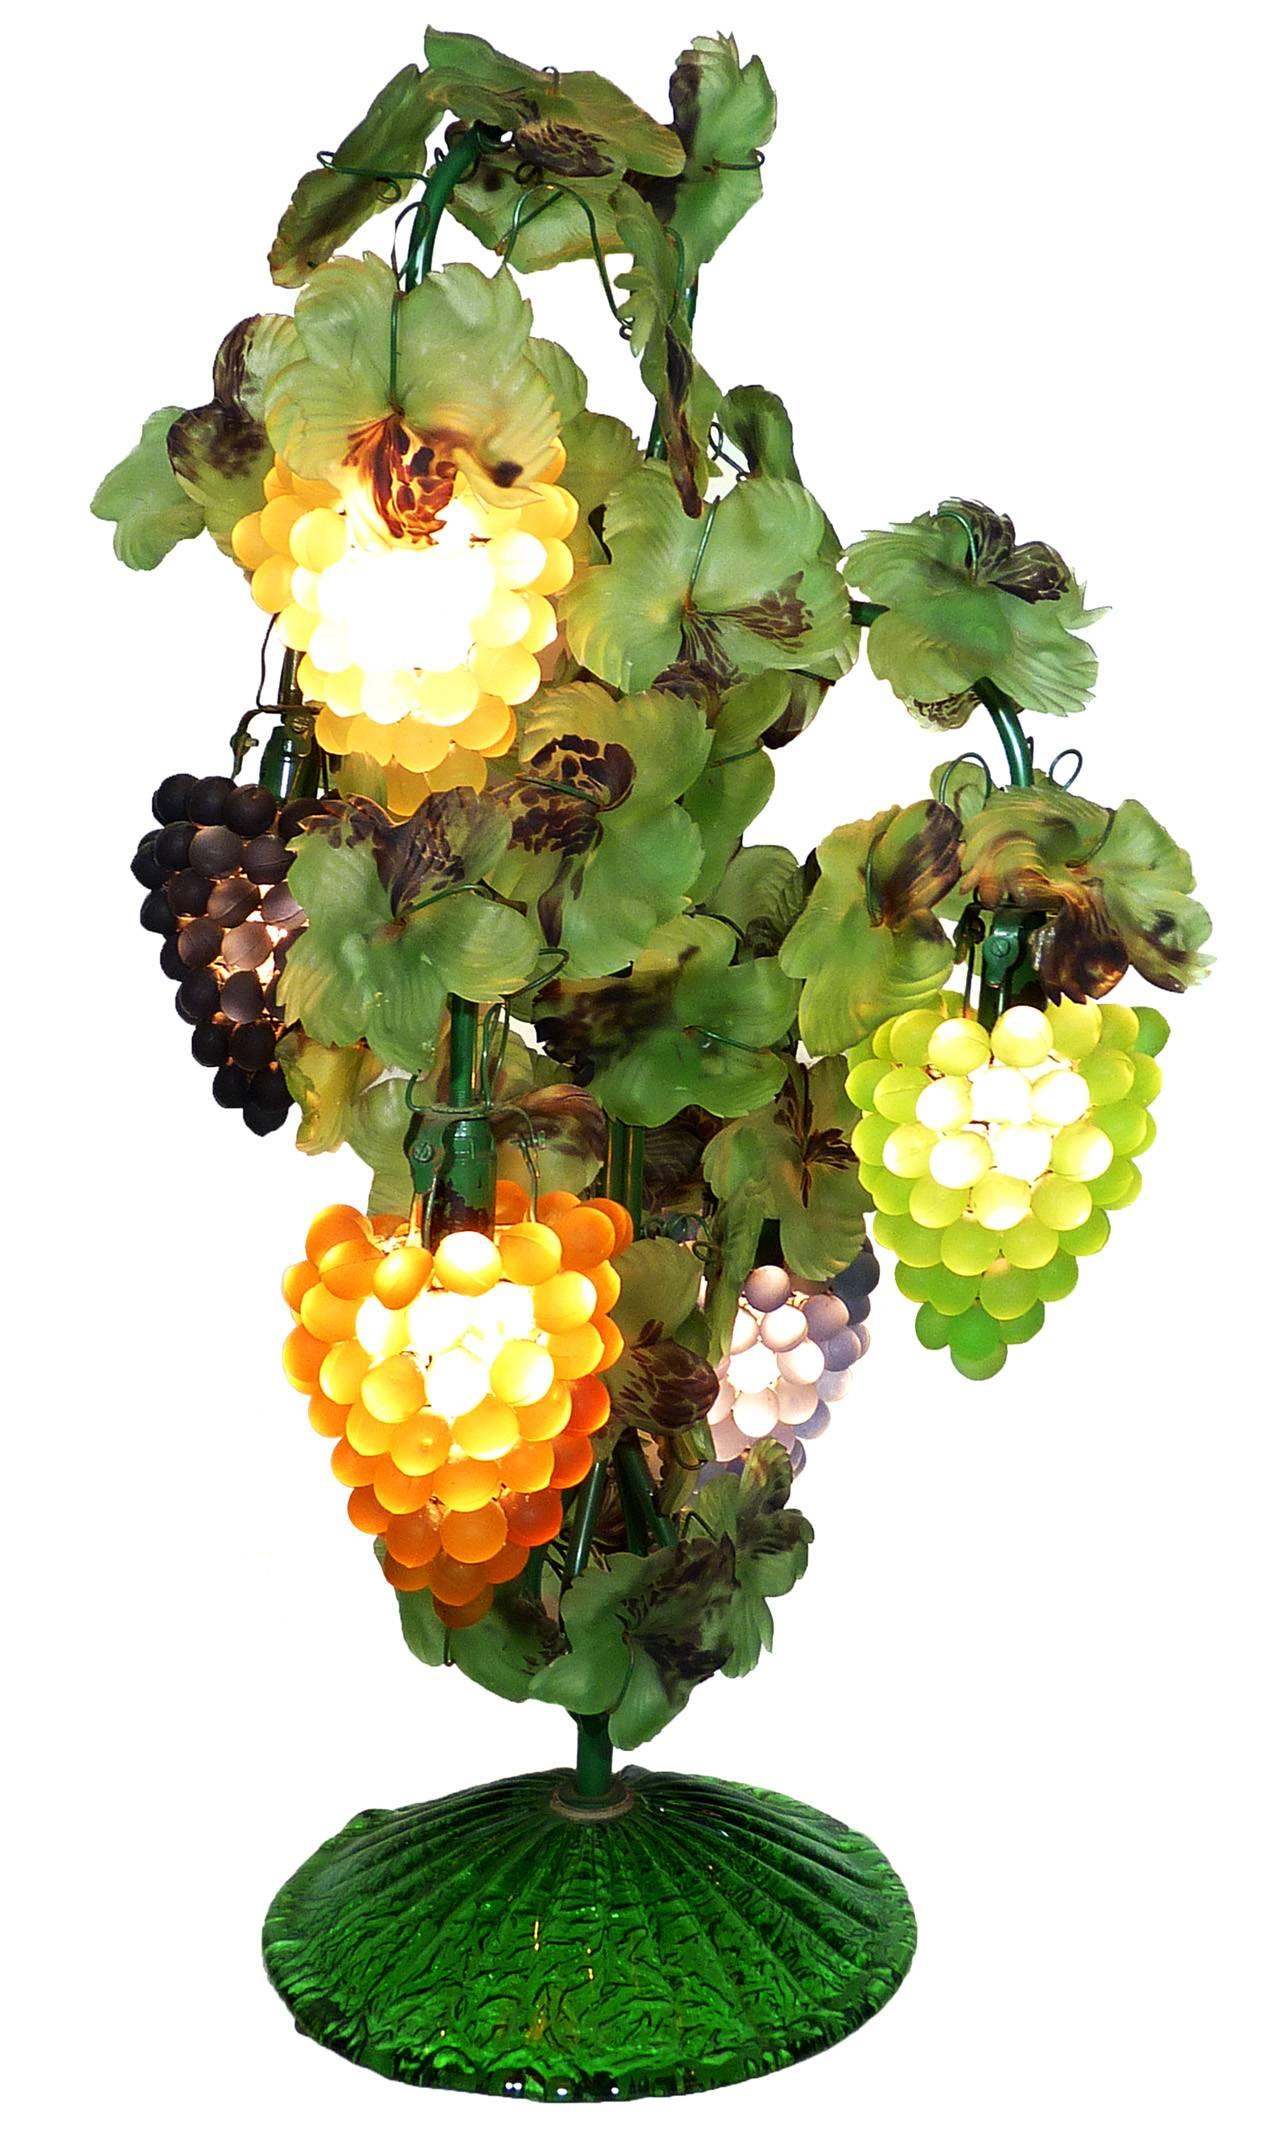 This a fabulous heavy five-light Venetian glass grape bunch and leaf floor or table lamp mimics the shape of a vine with clustered grapes as shades, handblown applied leaves in the style of Art Nouveau. 
Blown green glass base with five different